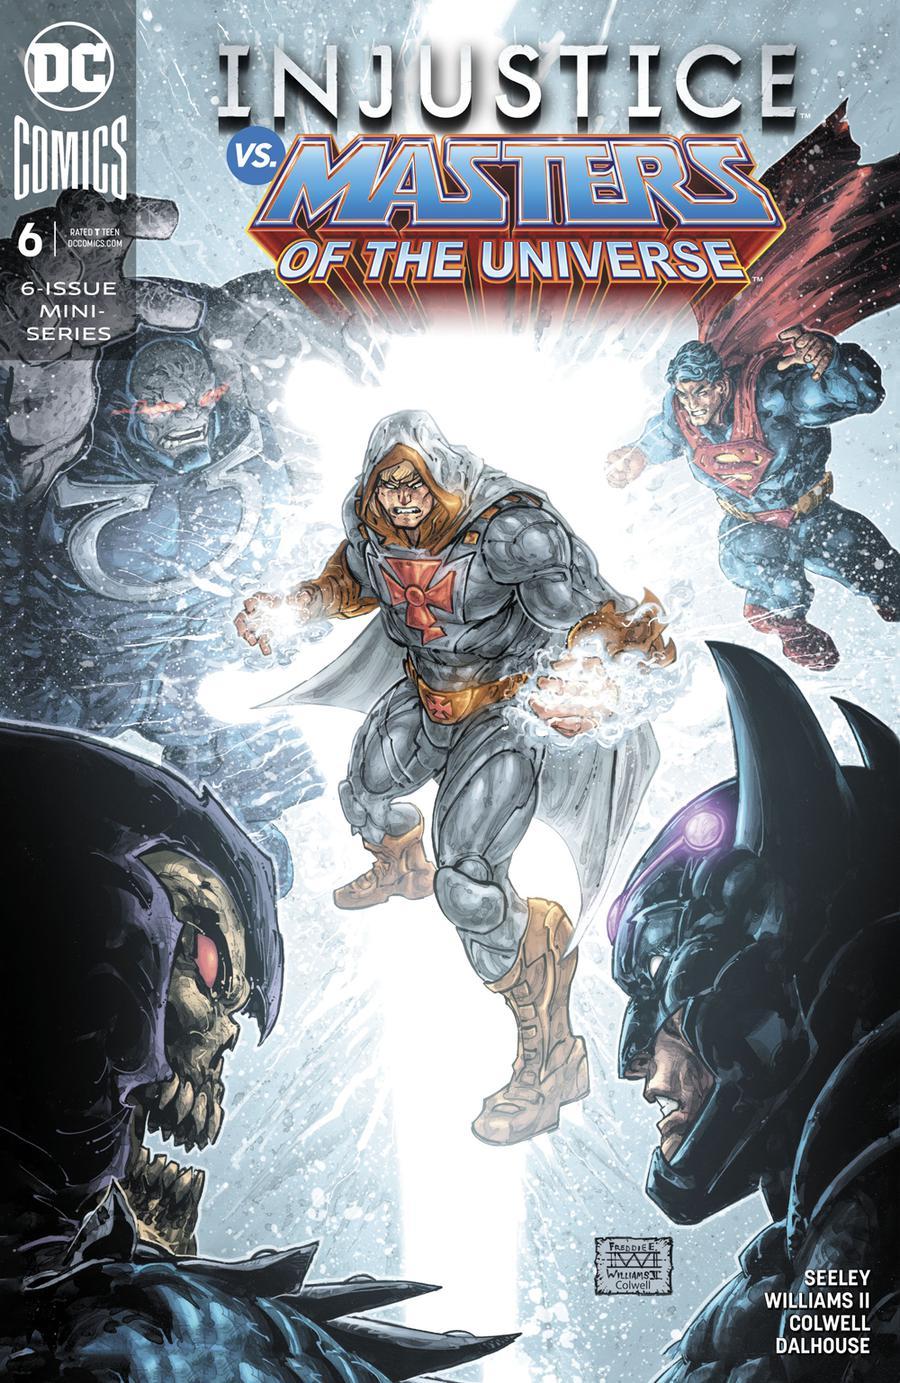 Injustice vs The Masters Of The Universe Vol. 1 #6